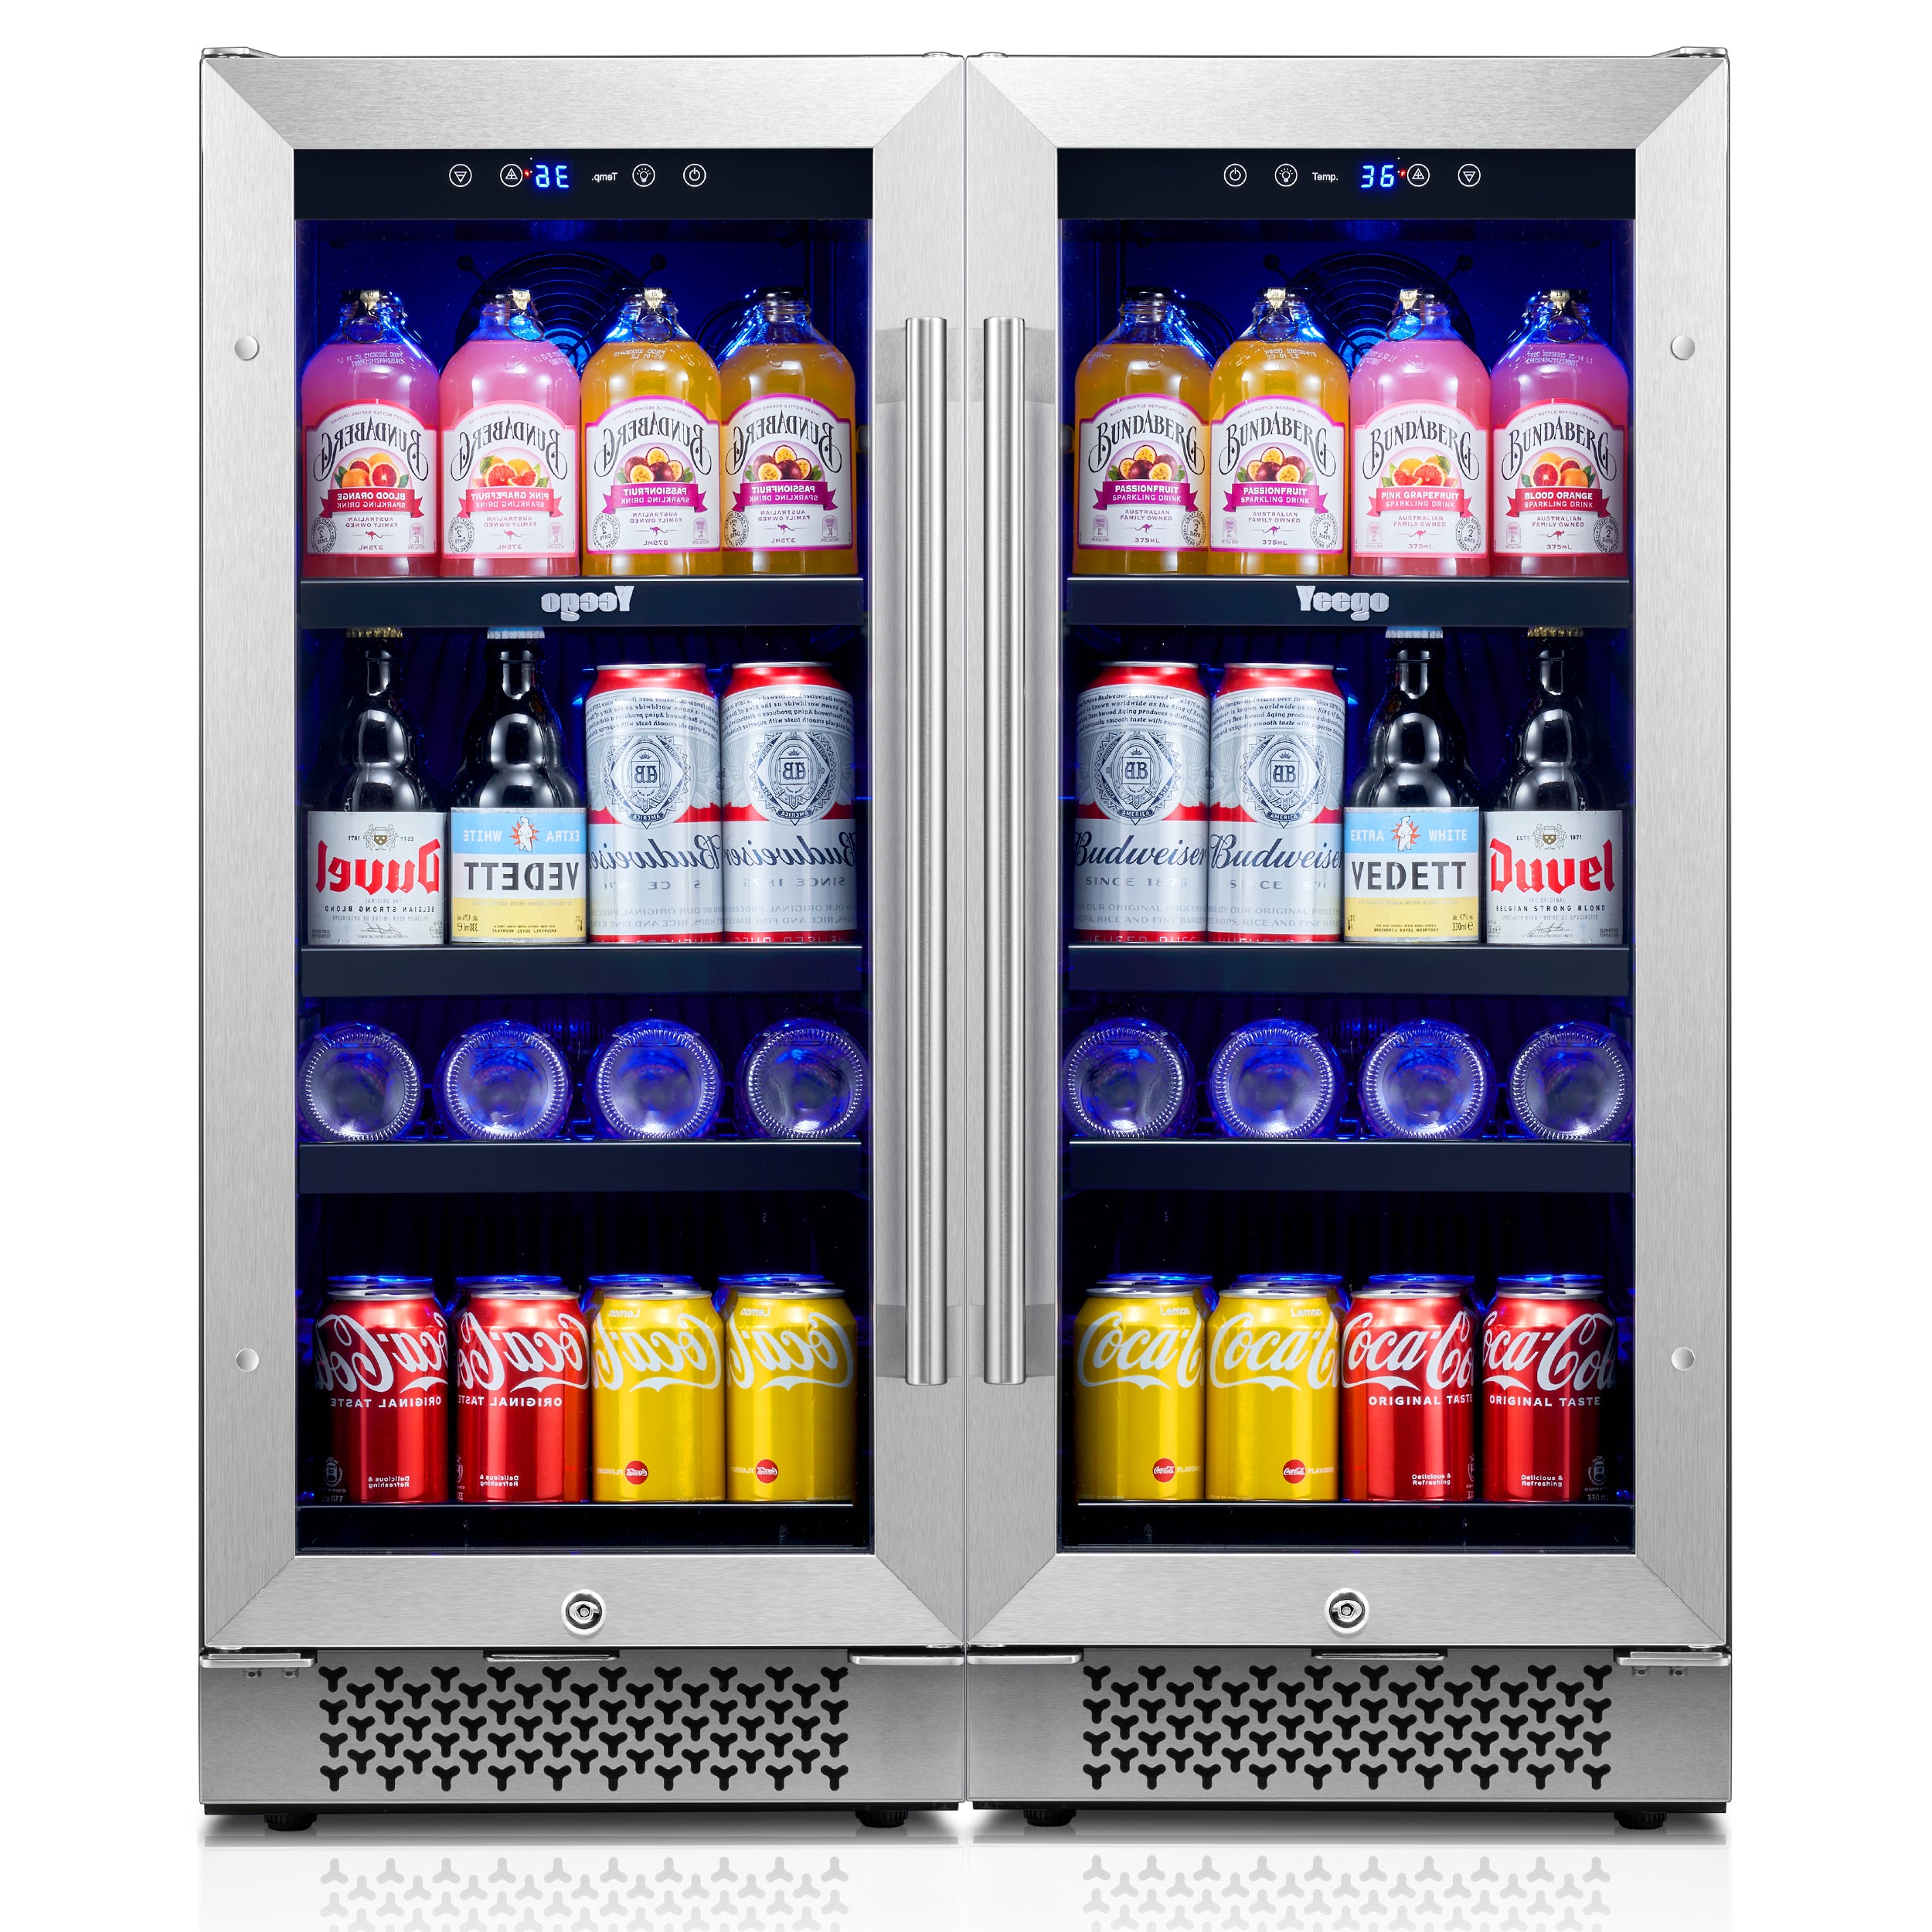 30 Inch Wide Dual Zone Beverage Cooler Combo, 160 Cans Capacity Drink Fridge, Under Counter or Freestanding